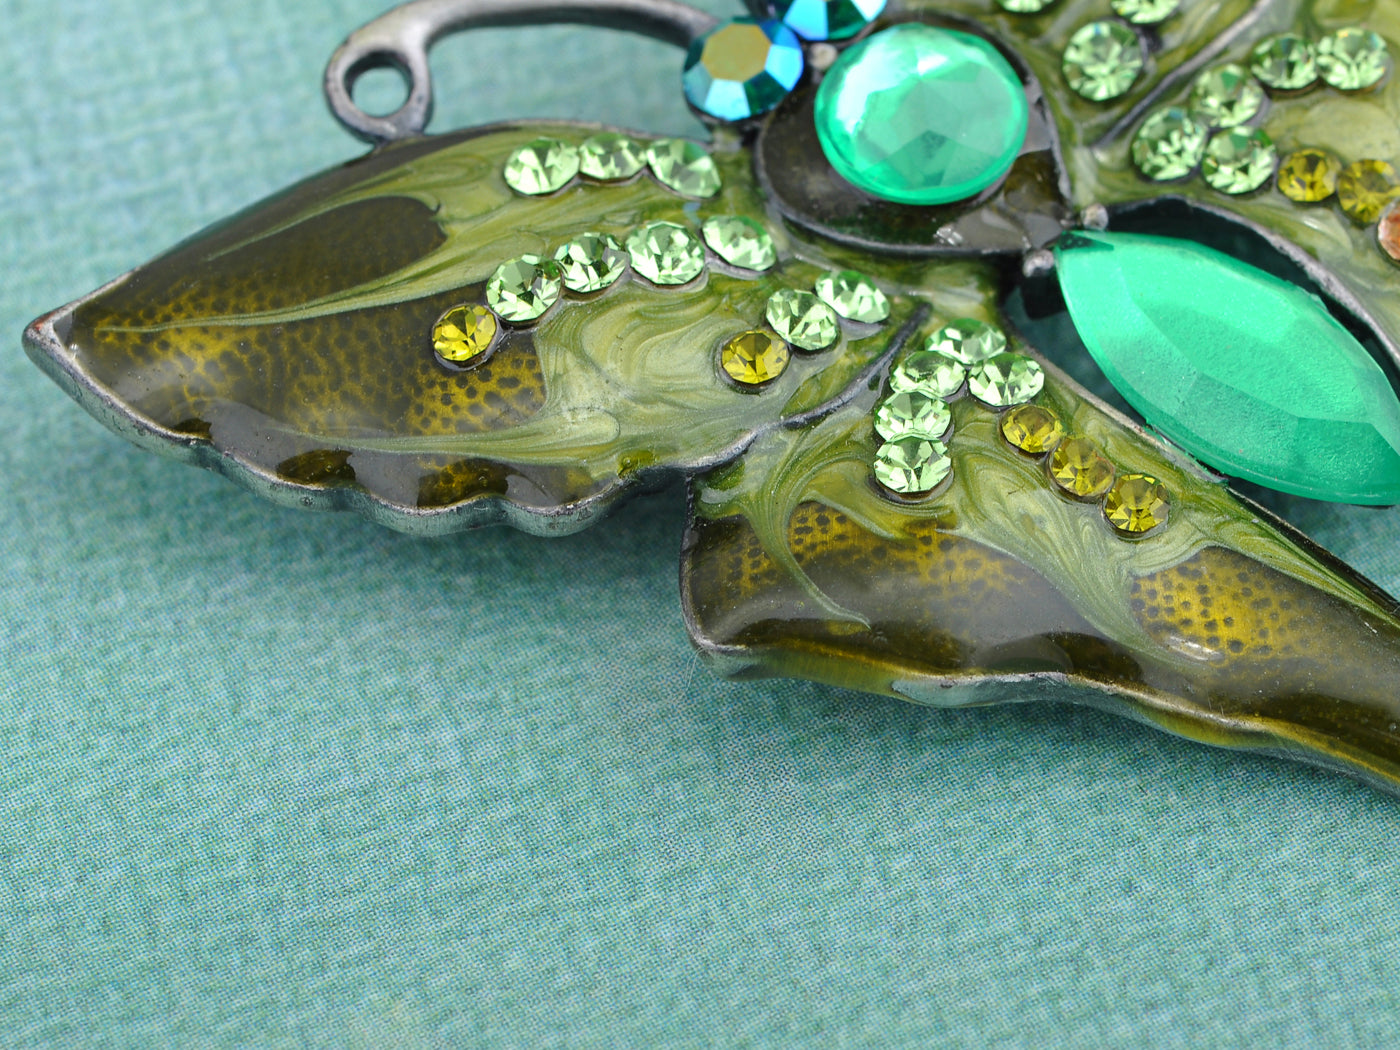 Antique Green Vintage Butterfly Brooch Pin